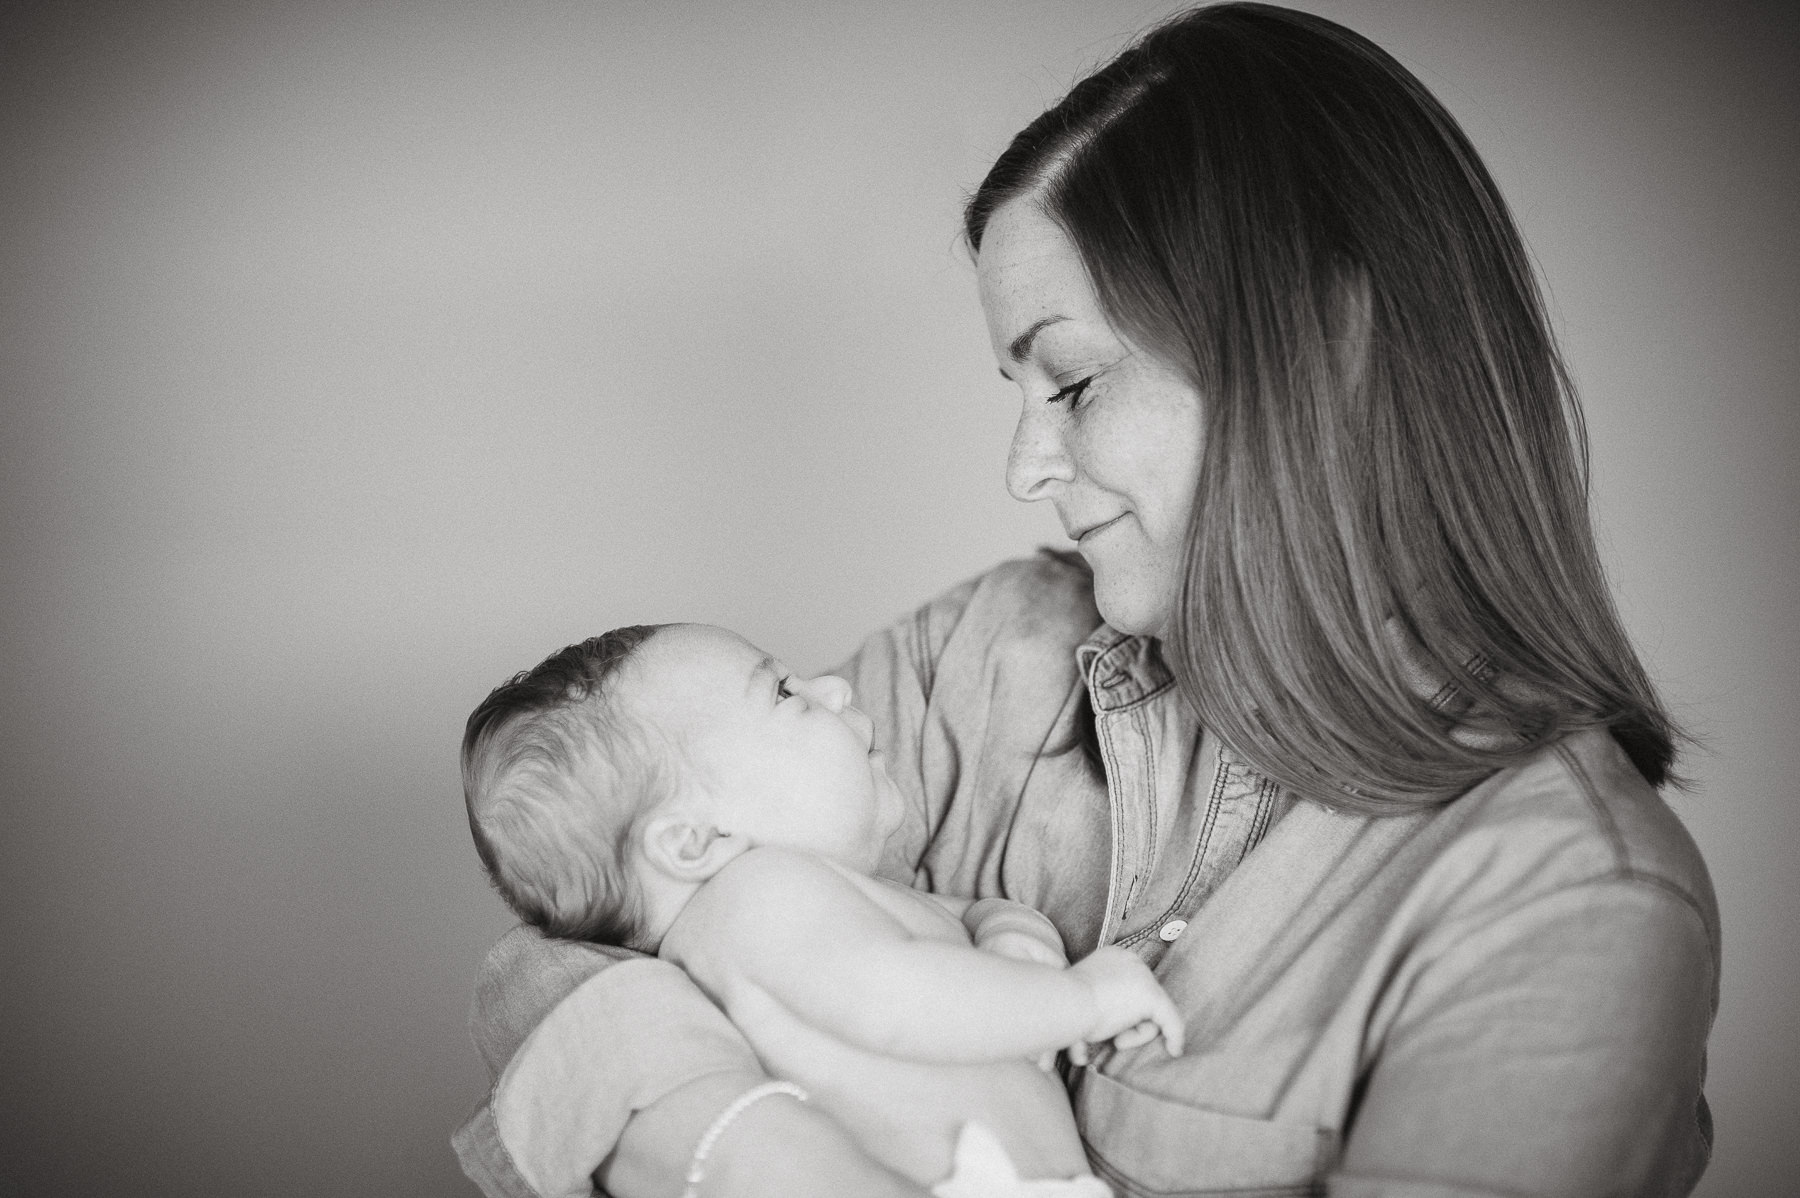 breighton-and-basette-photography-copyrighted-image-blog-croix-newborn-024.jpg